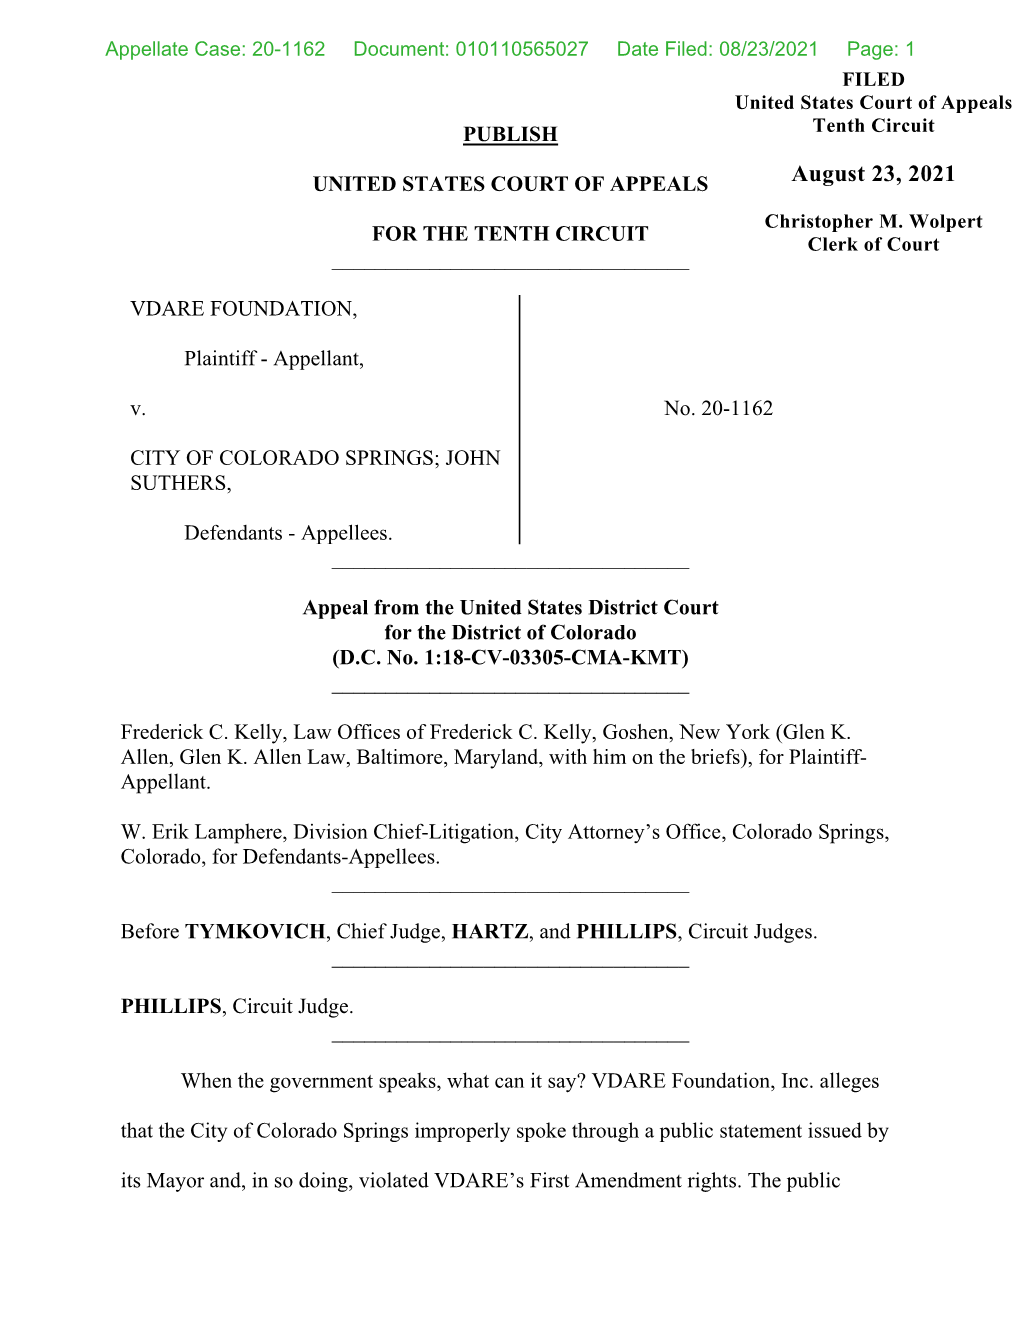 20-1162 Document: 010110565027 Date Filed: 08/23/2021 Page: 1 FILED United States Court of Appeals PUBLISH Tenth Circuit